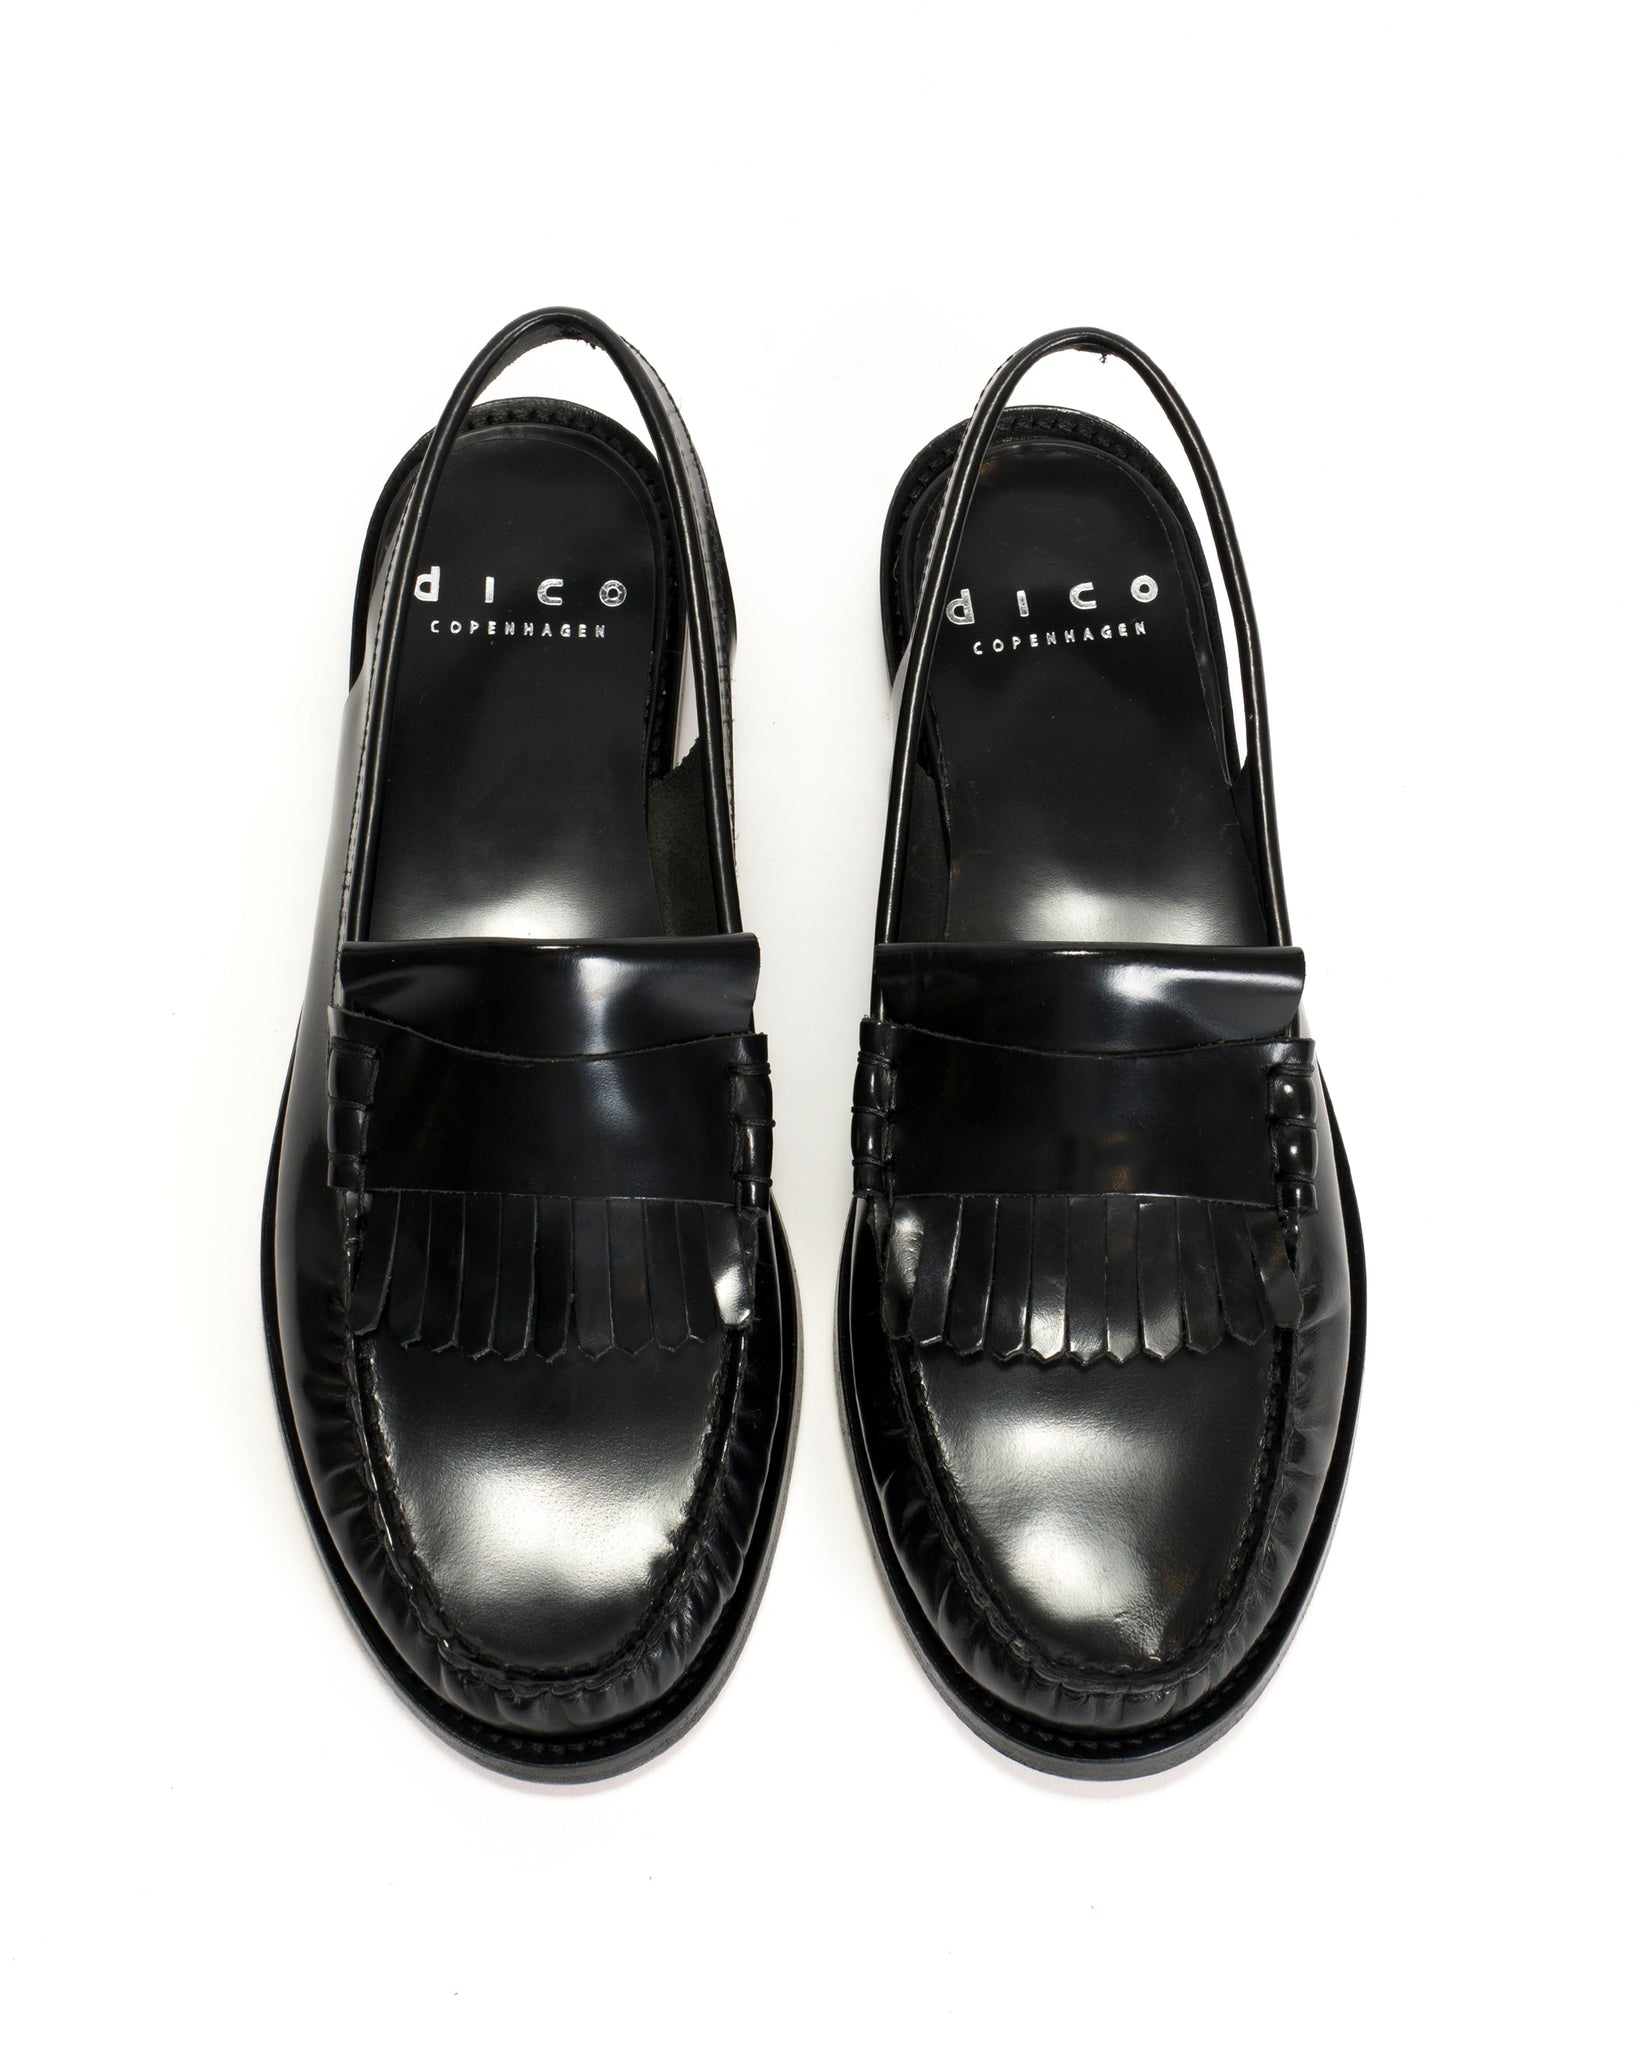 Dico Slingback Moccasin Loafer With Fringes Polido Black - Anonymous Copenhagen